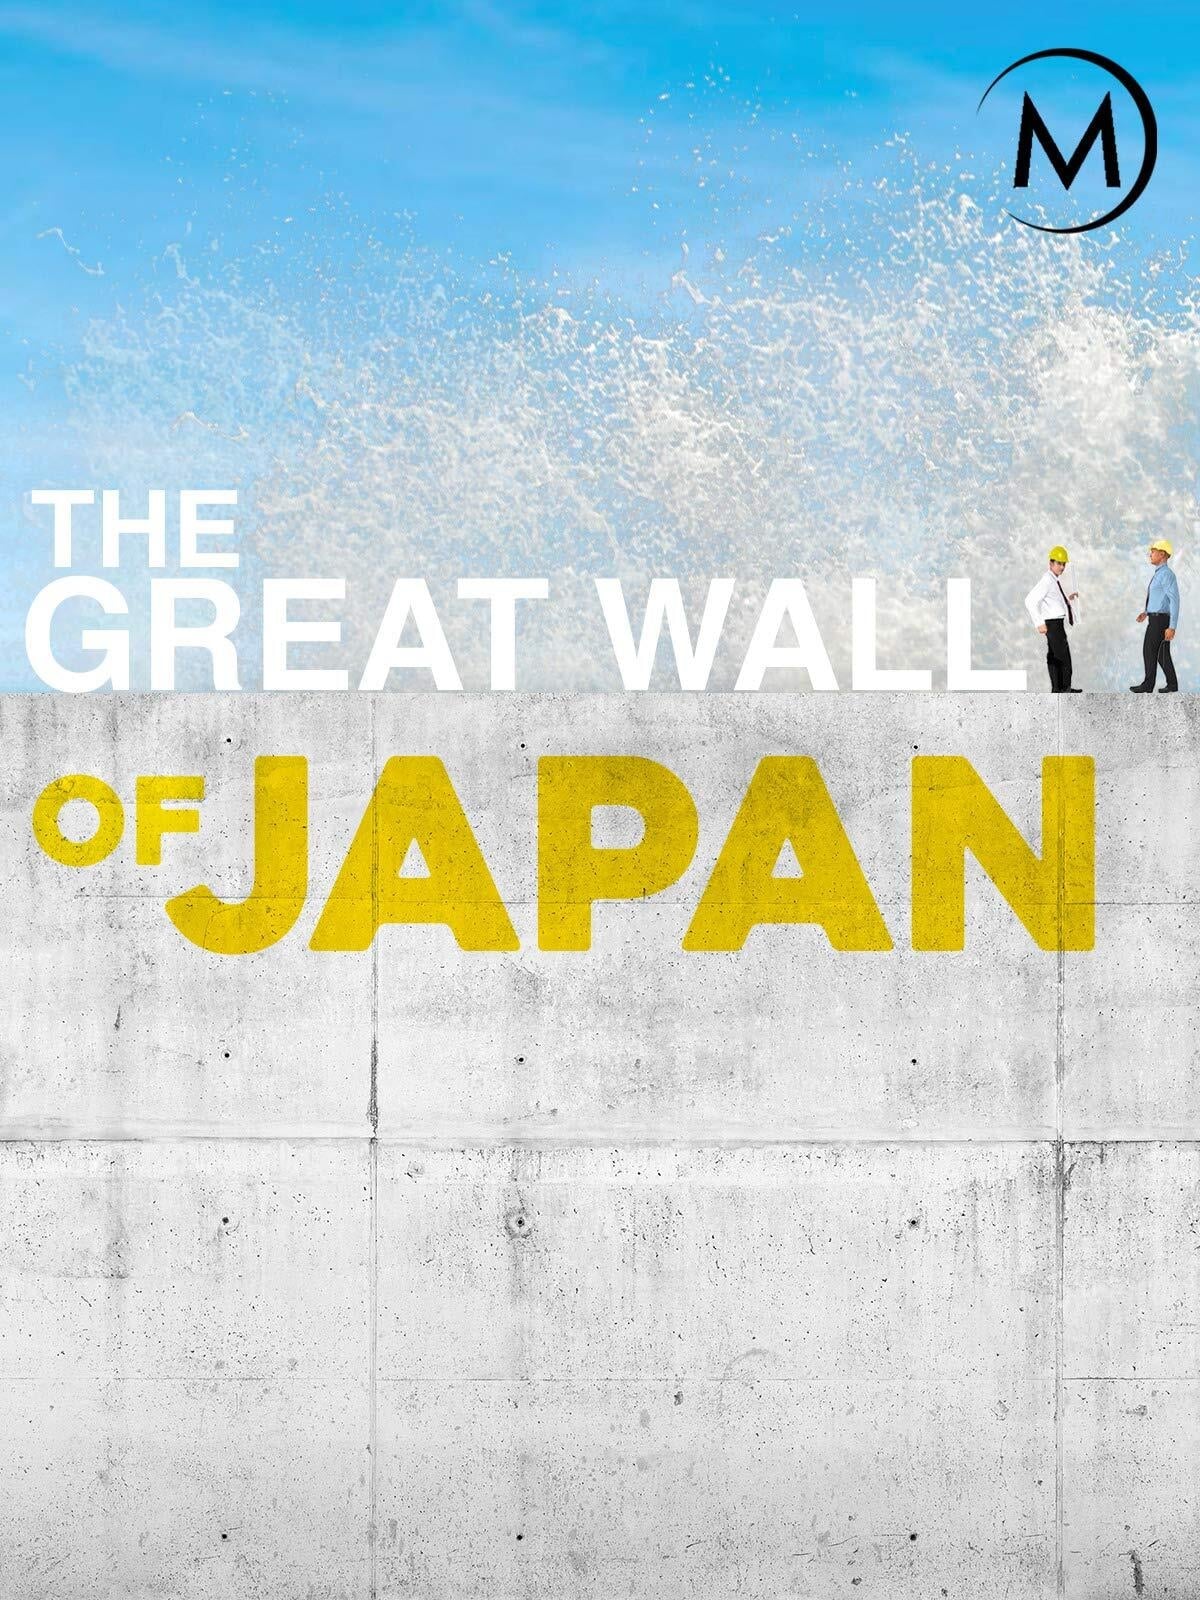 The Great Wall of Japan